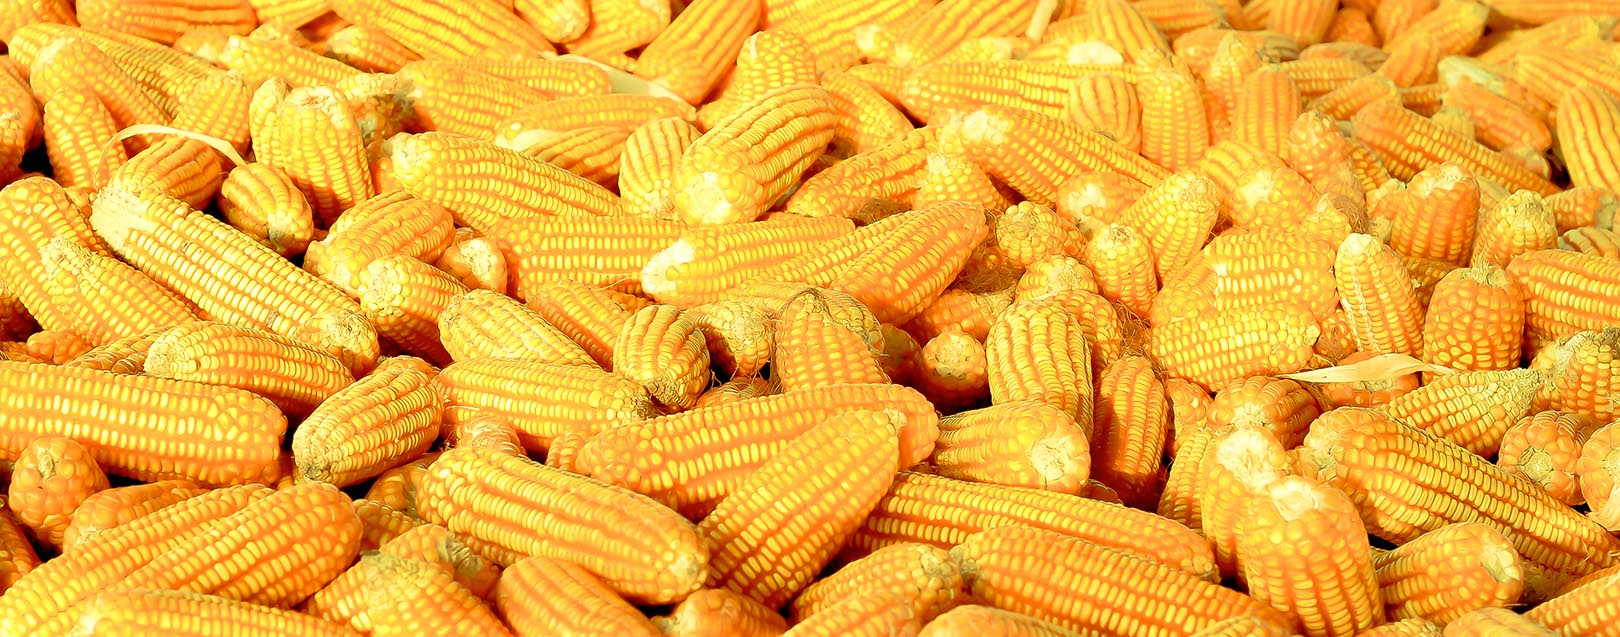 Maize productivity up 4.8 times: Radha Mohan Singh